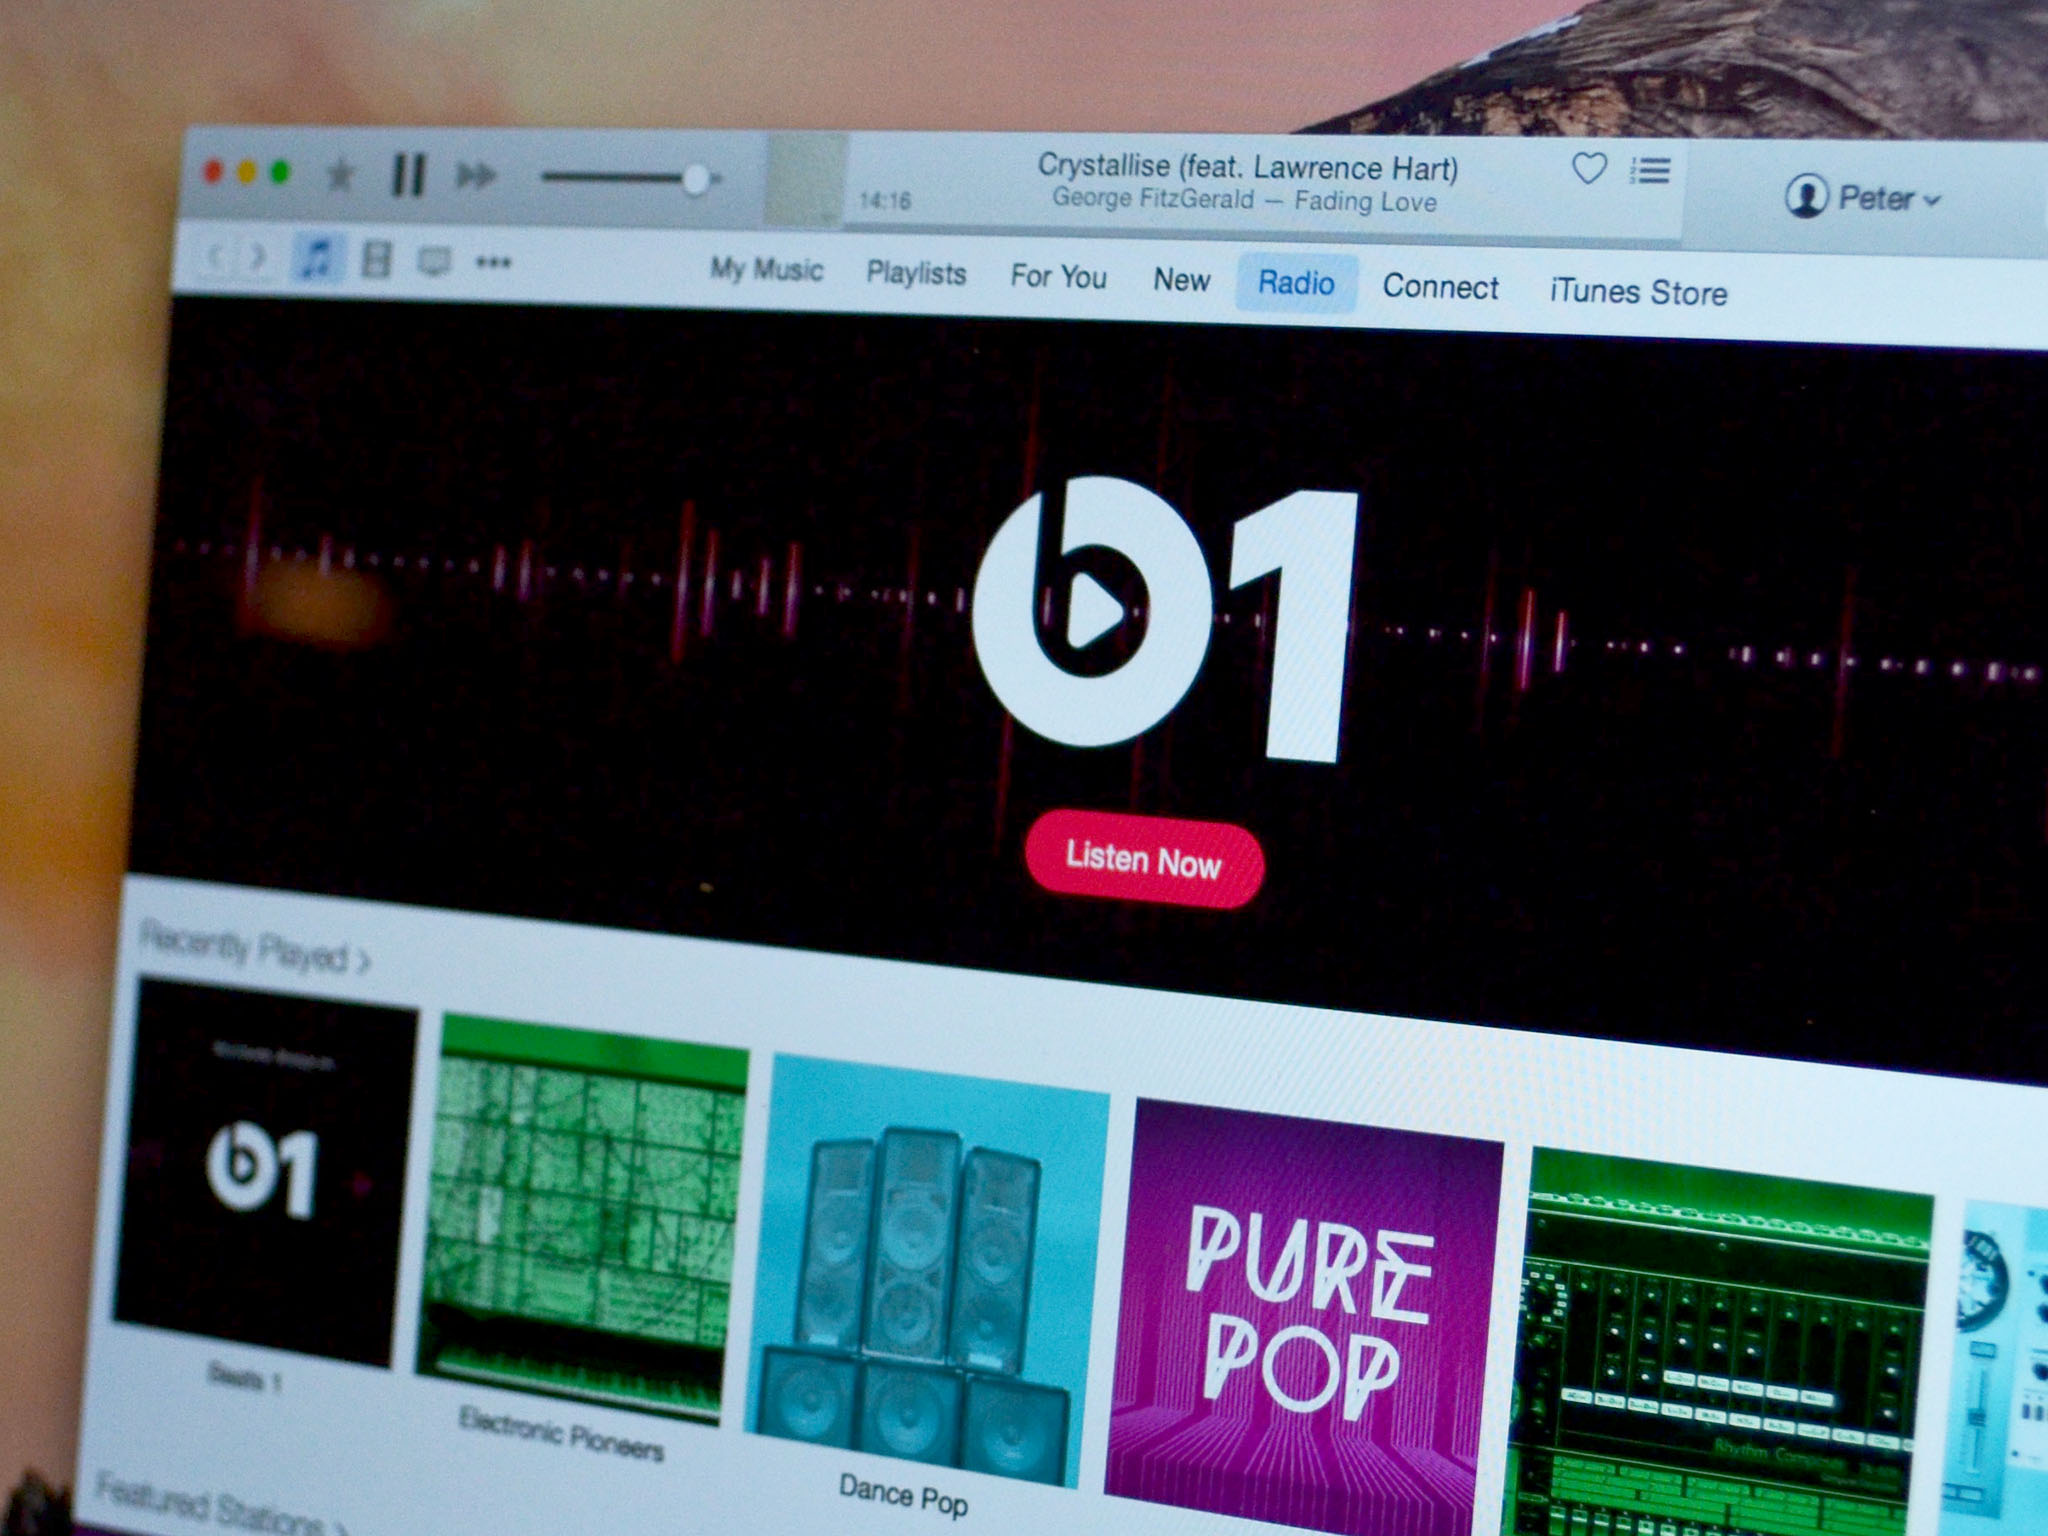 How to get AirPlay working with Beats 1 on the Mac